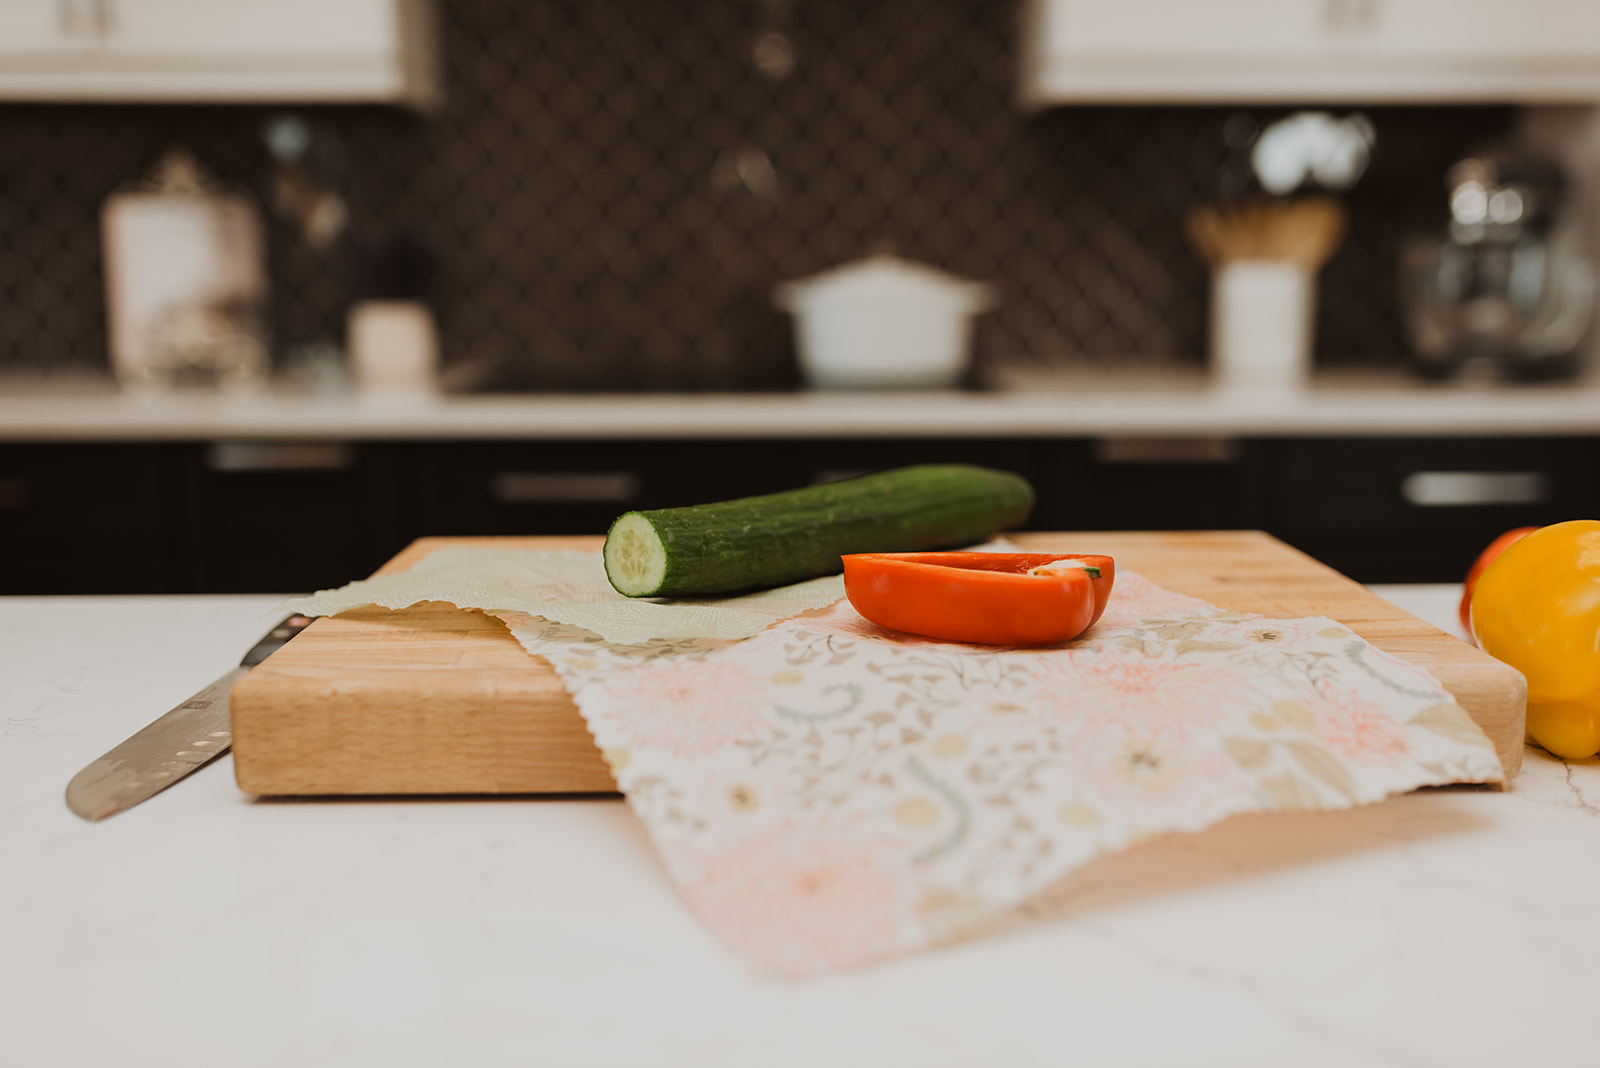 chopping board with cucumber, pepper and floral food wrap in kitchen with black tiles